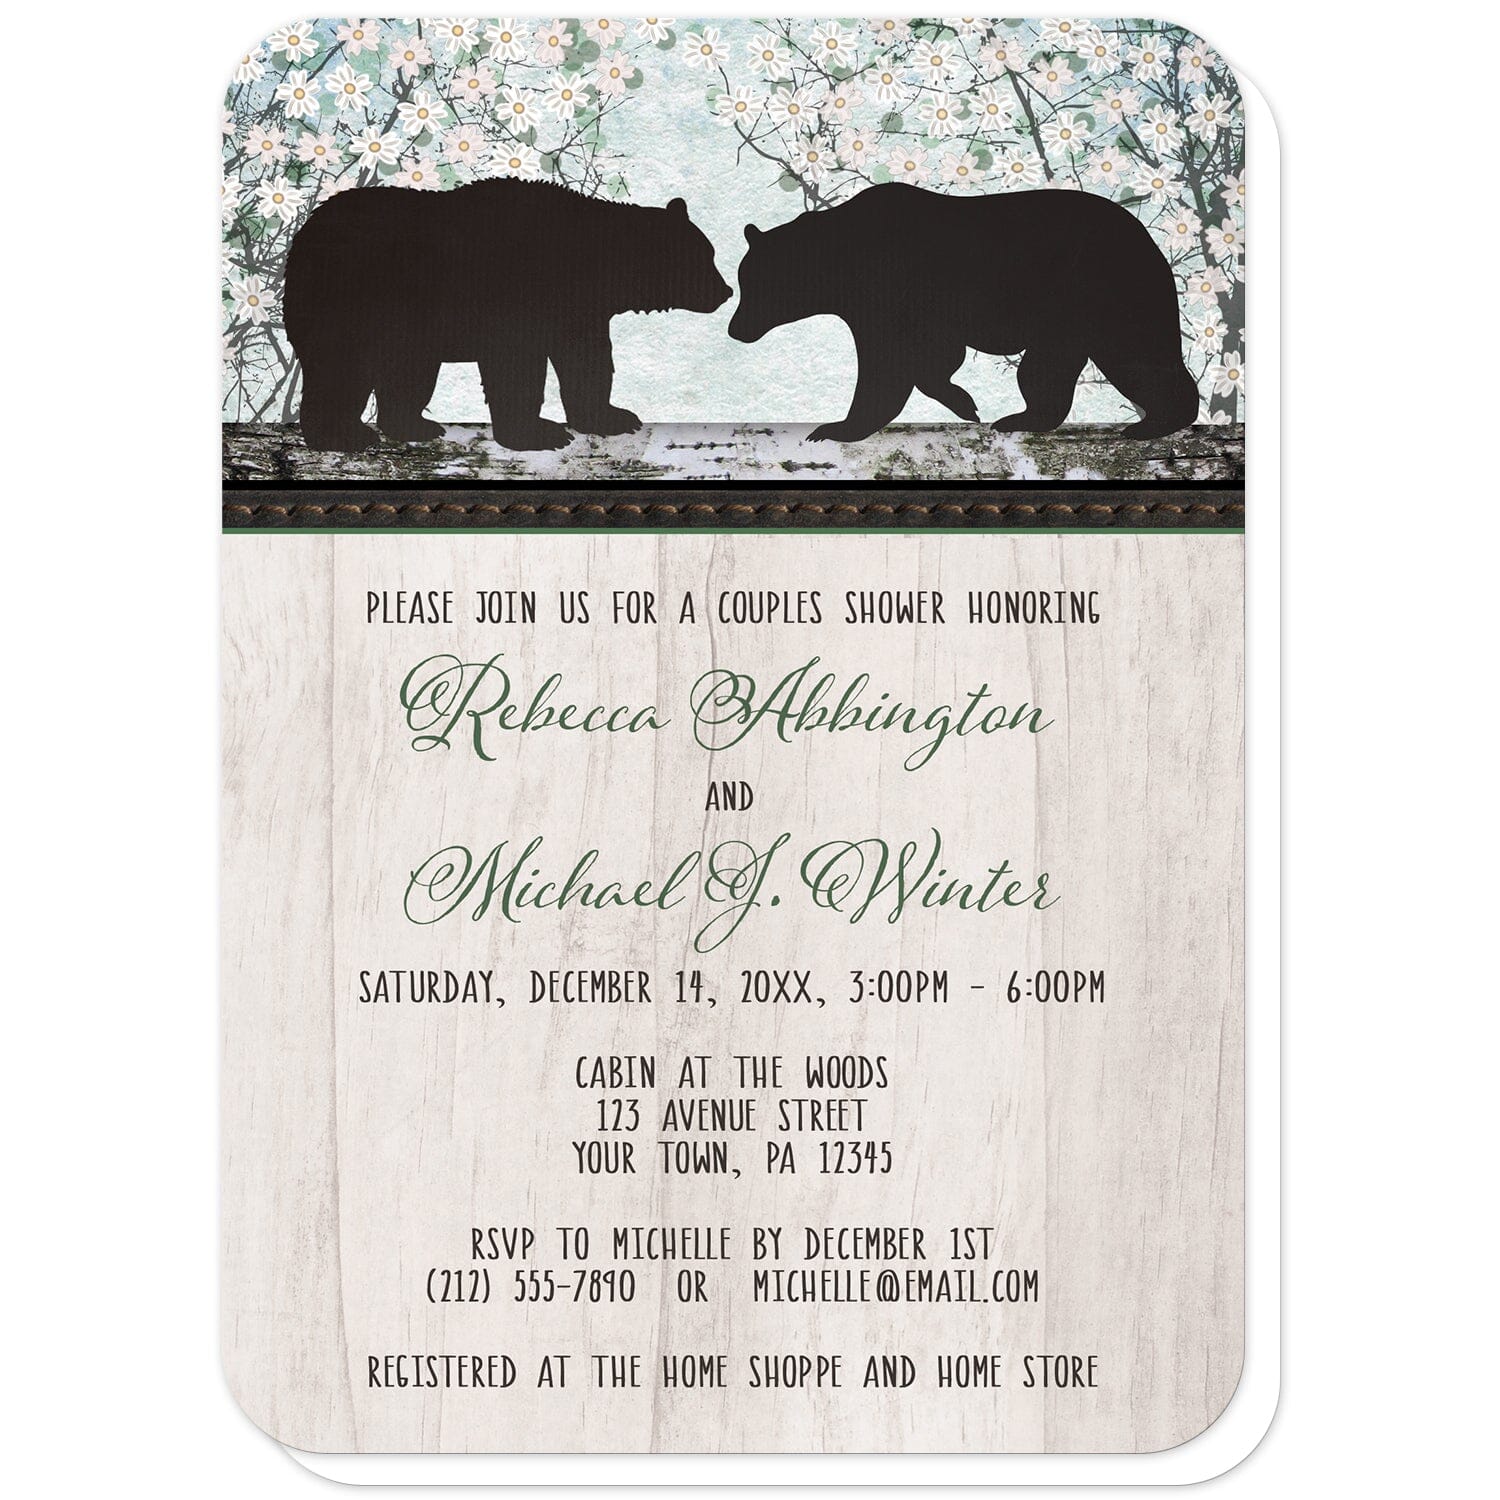 Rustic Bear Floral Wood Couples Shower Invitations (with rounded corners) at Artistically Invited. Rustic bear floral wood couples shower invitations with two silhouette bears on a wooden tree trunk-like stripe over a whimsical spring floral trees illustration. Your personalized couples shower details are custom printed in black and green over a light rustic wood image background.